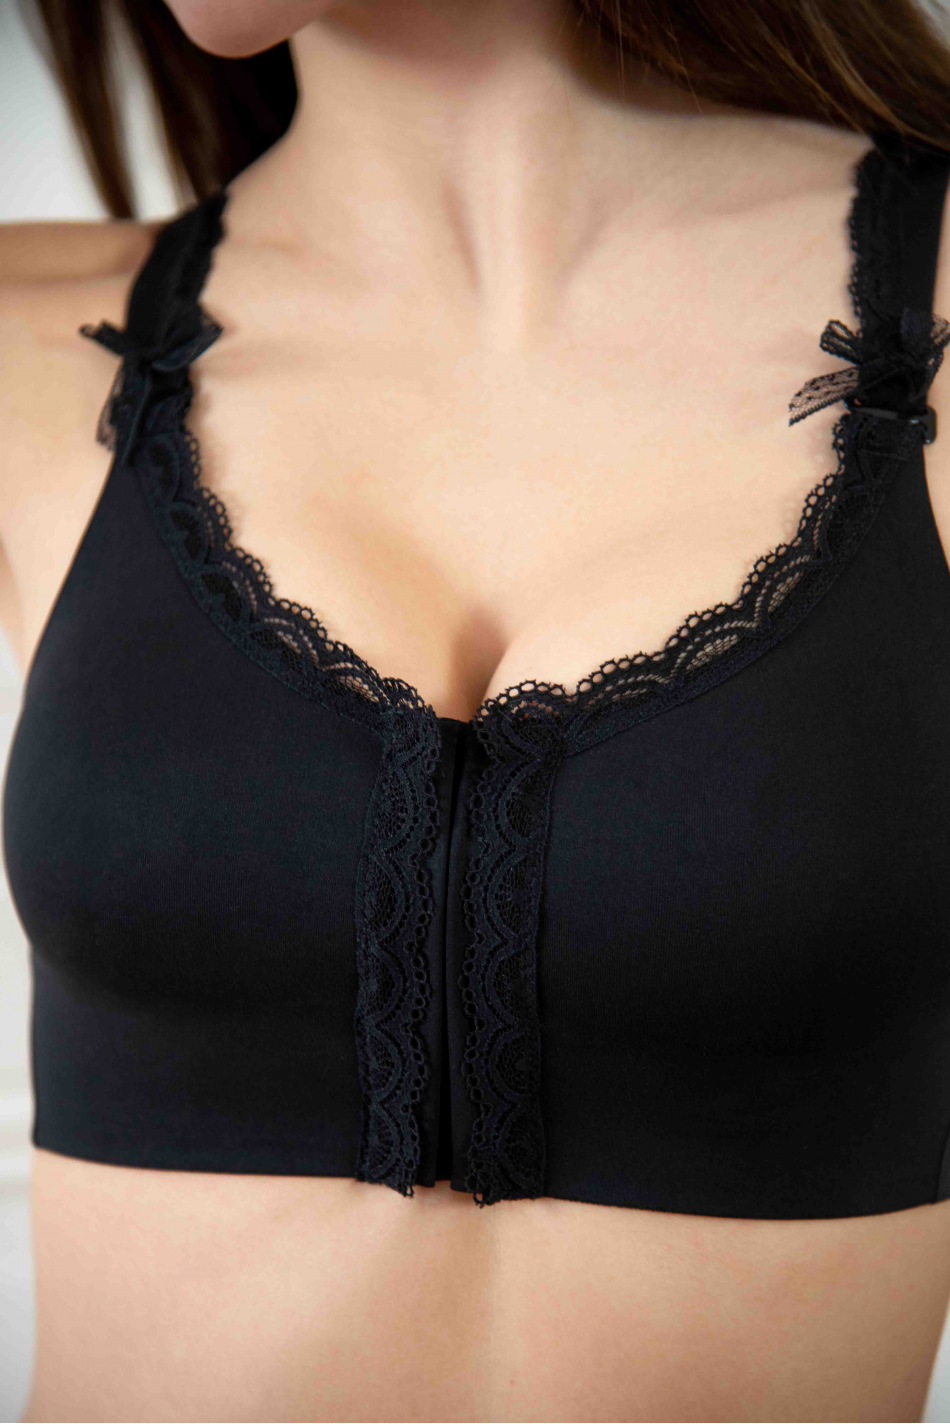 Post-op Bra After Breast Enlargement or Reduction - Black Size XS